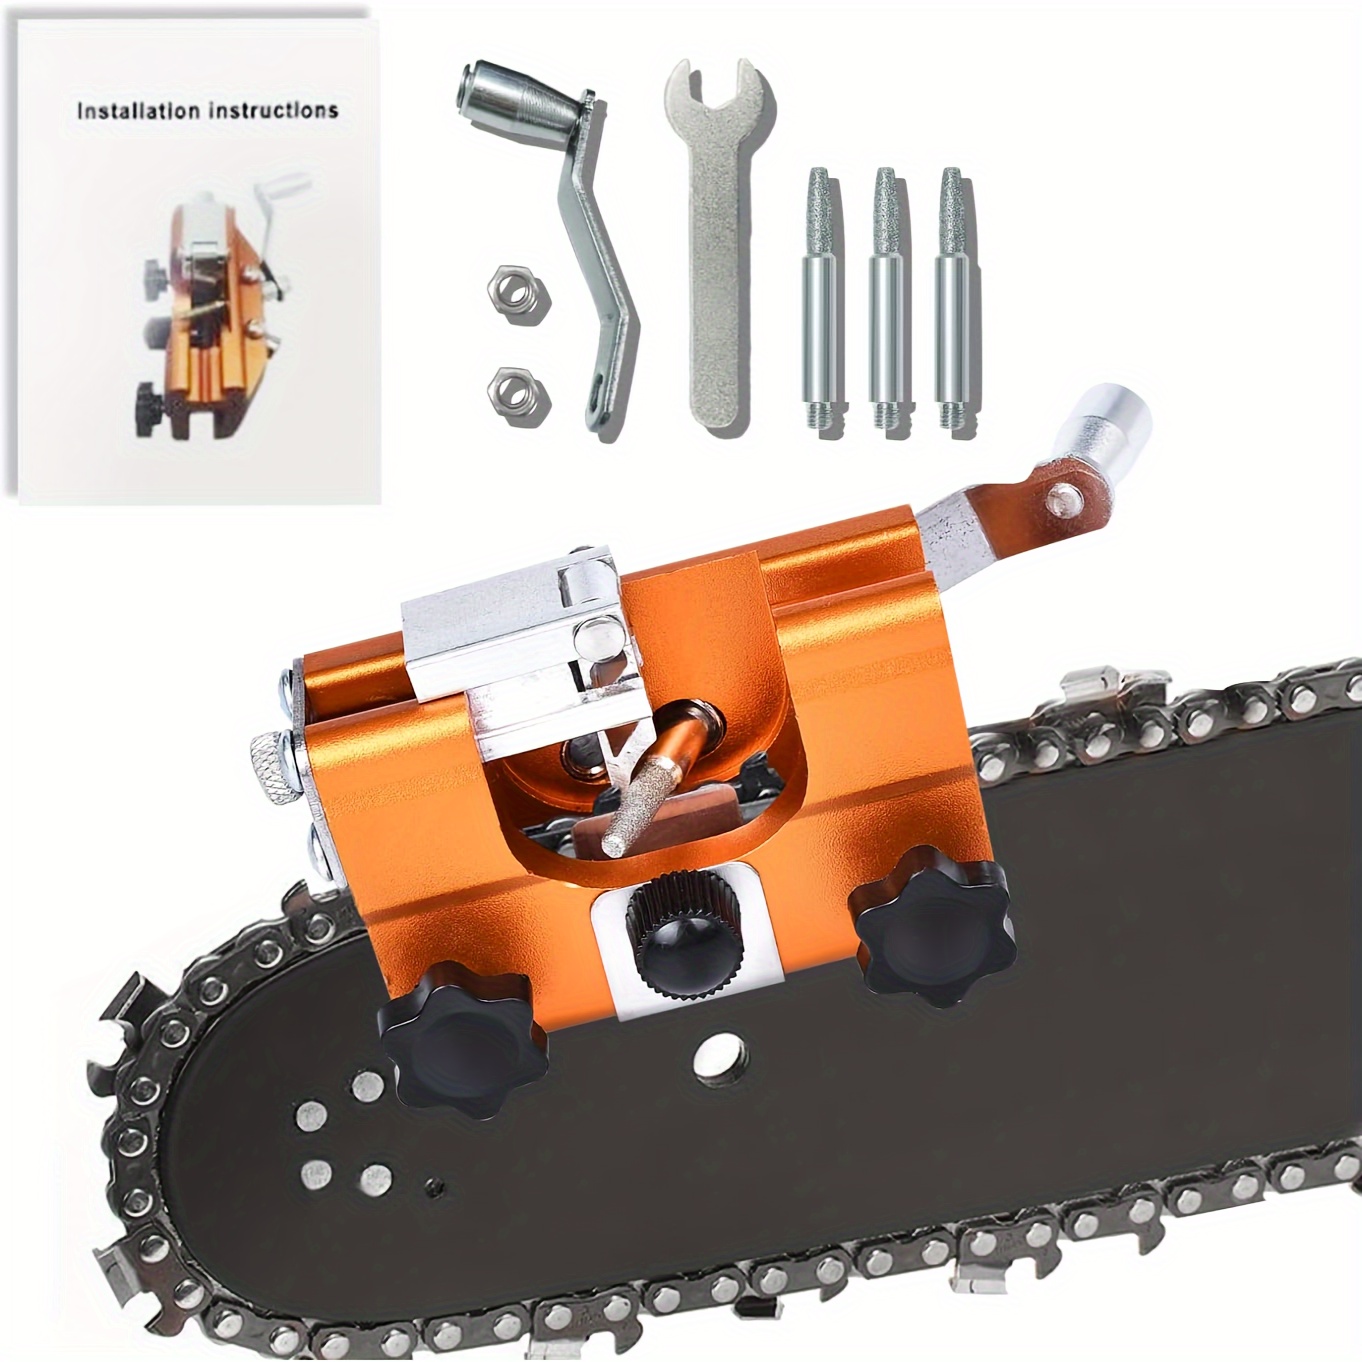 

Manual Chain Sharpener, Portable Chain Grinder, Chainsaw Clamp Grinding Tool, Quick Chainsaw Chain Sharpener Accessory, Compatible With Multiple Sizes (4"-22") - Durable Handheld & Accessories